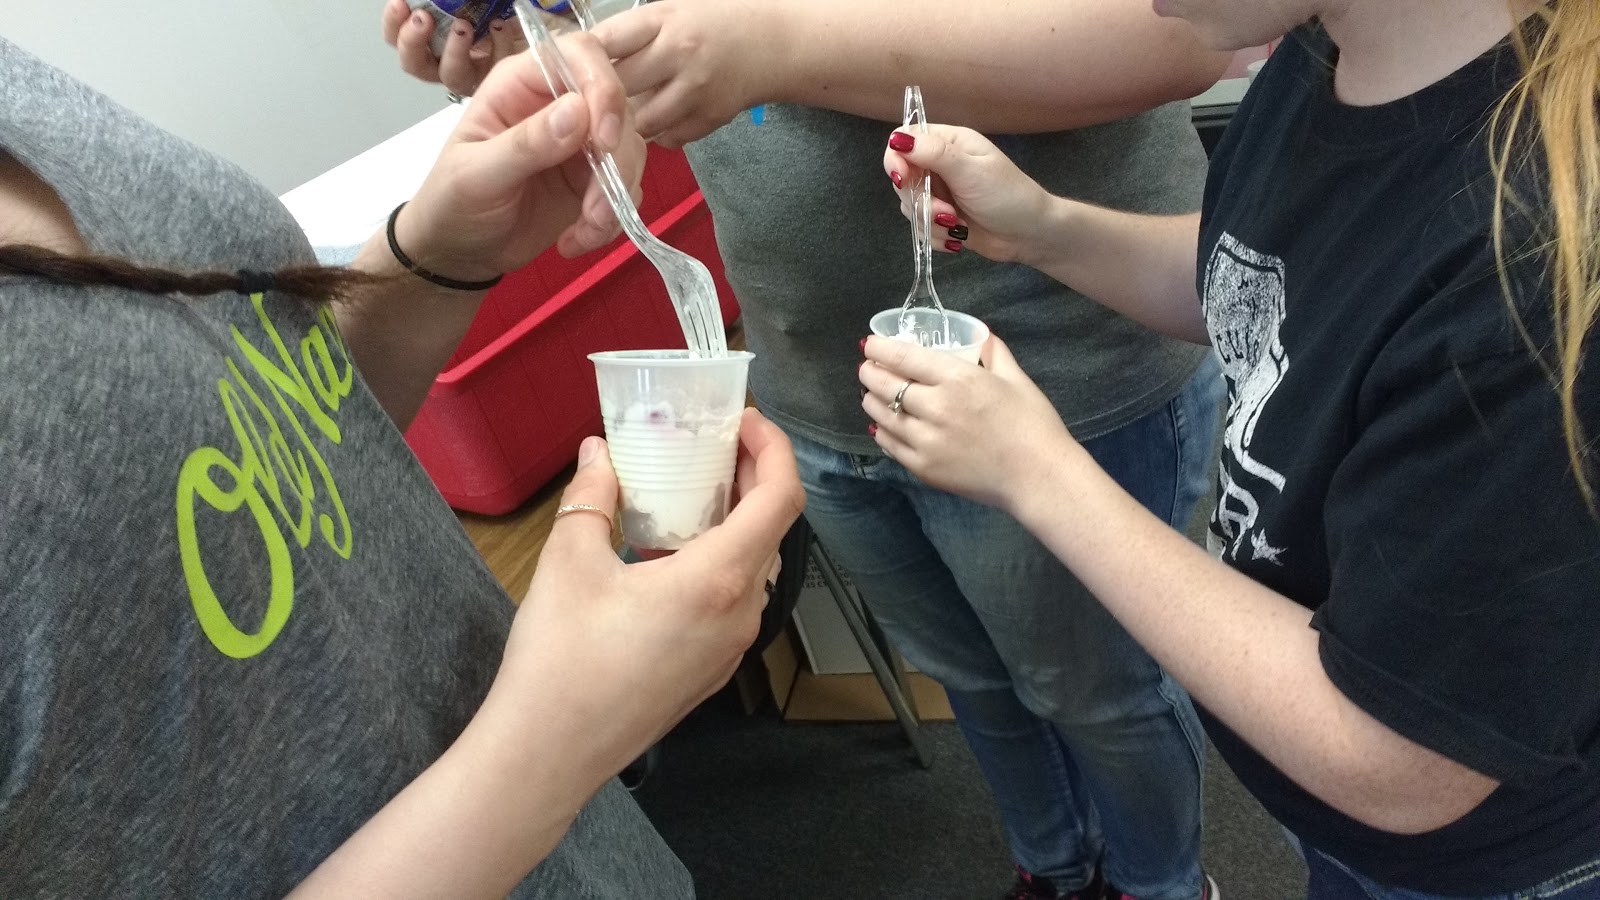 ice cream in a bag lab chemistry